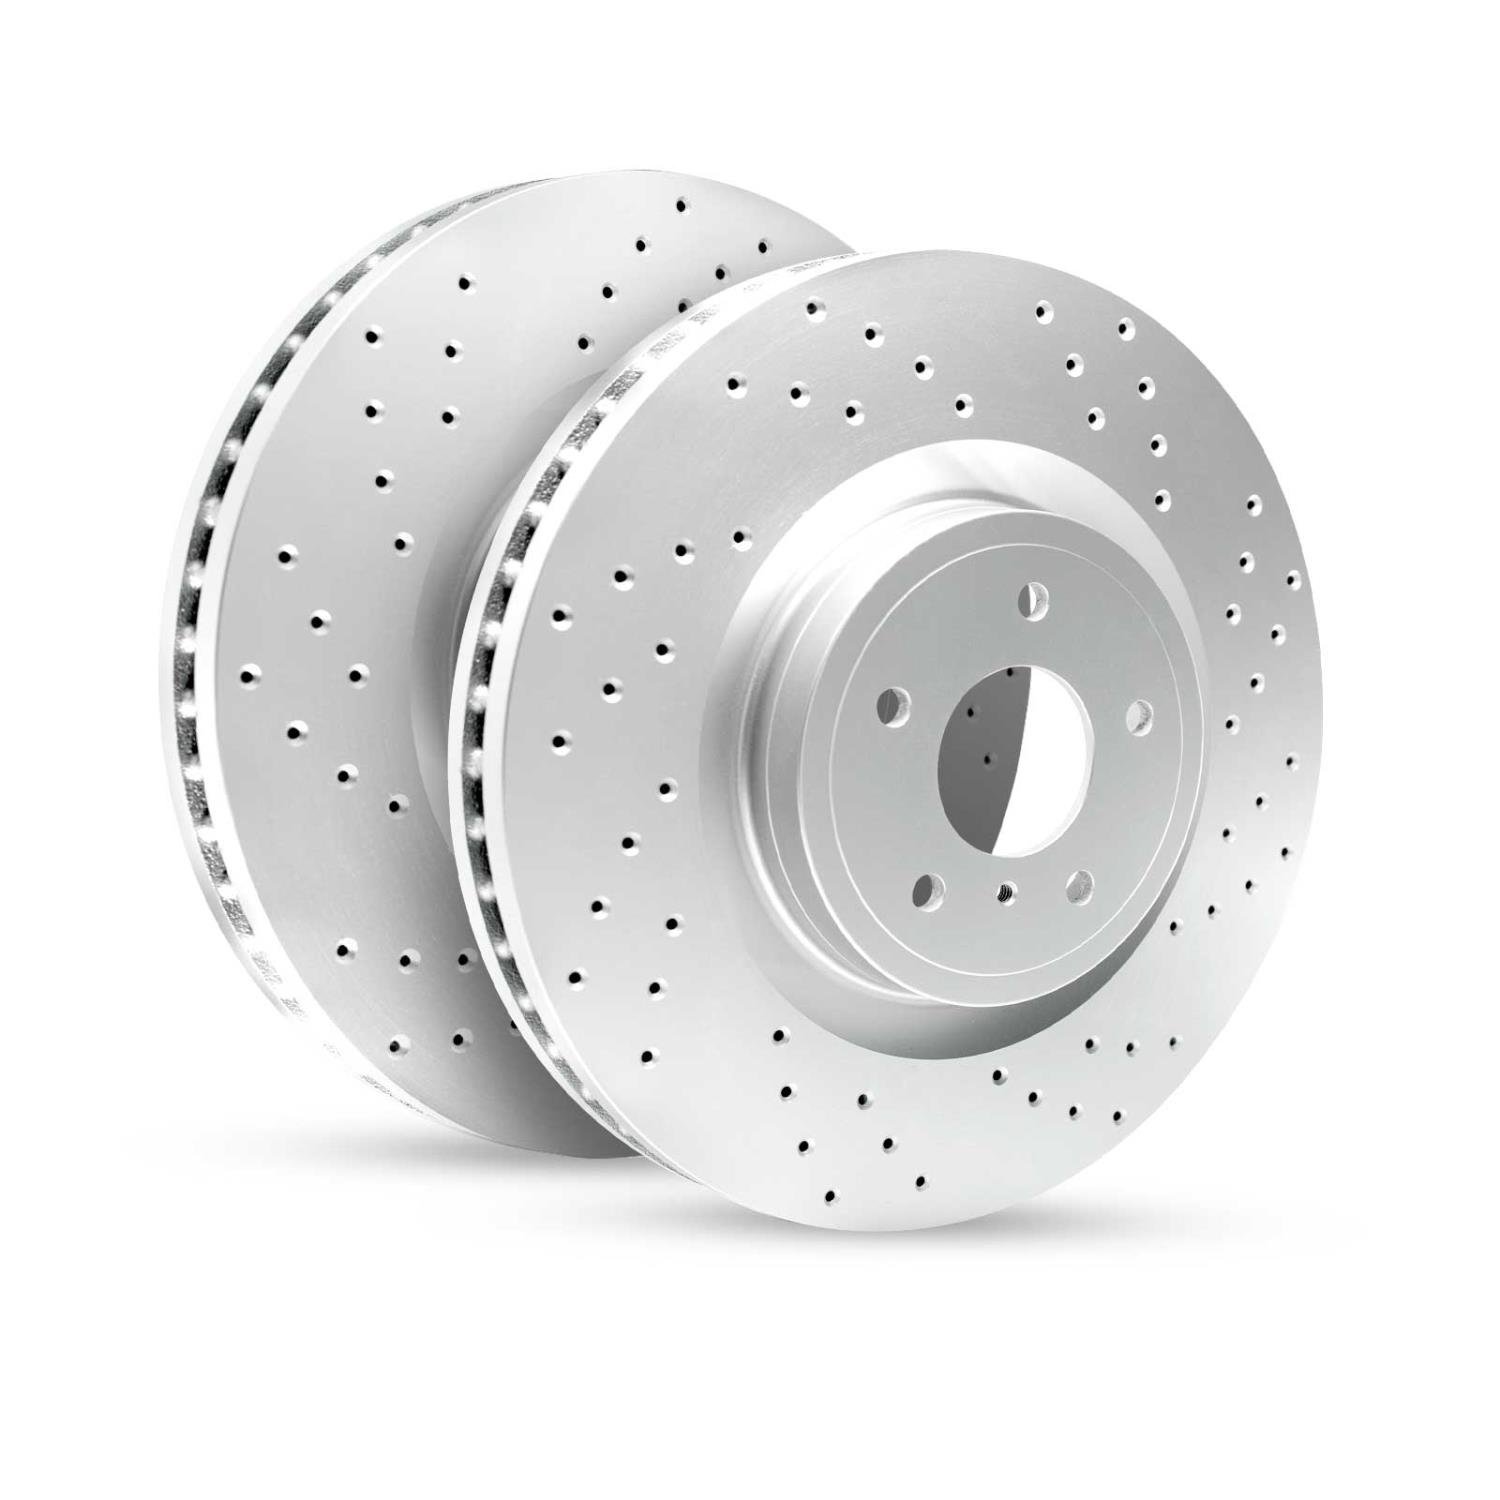 GEO-Carbon Drilled/Slotted Rotors, 2007-2019 Suzuki, Position: Front